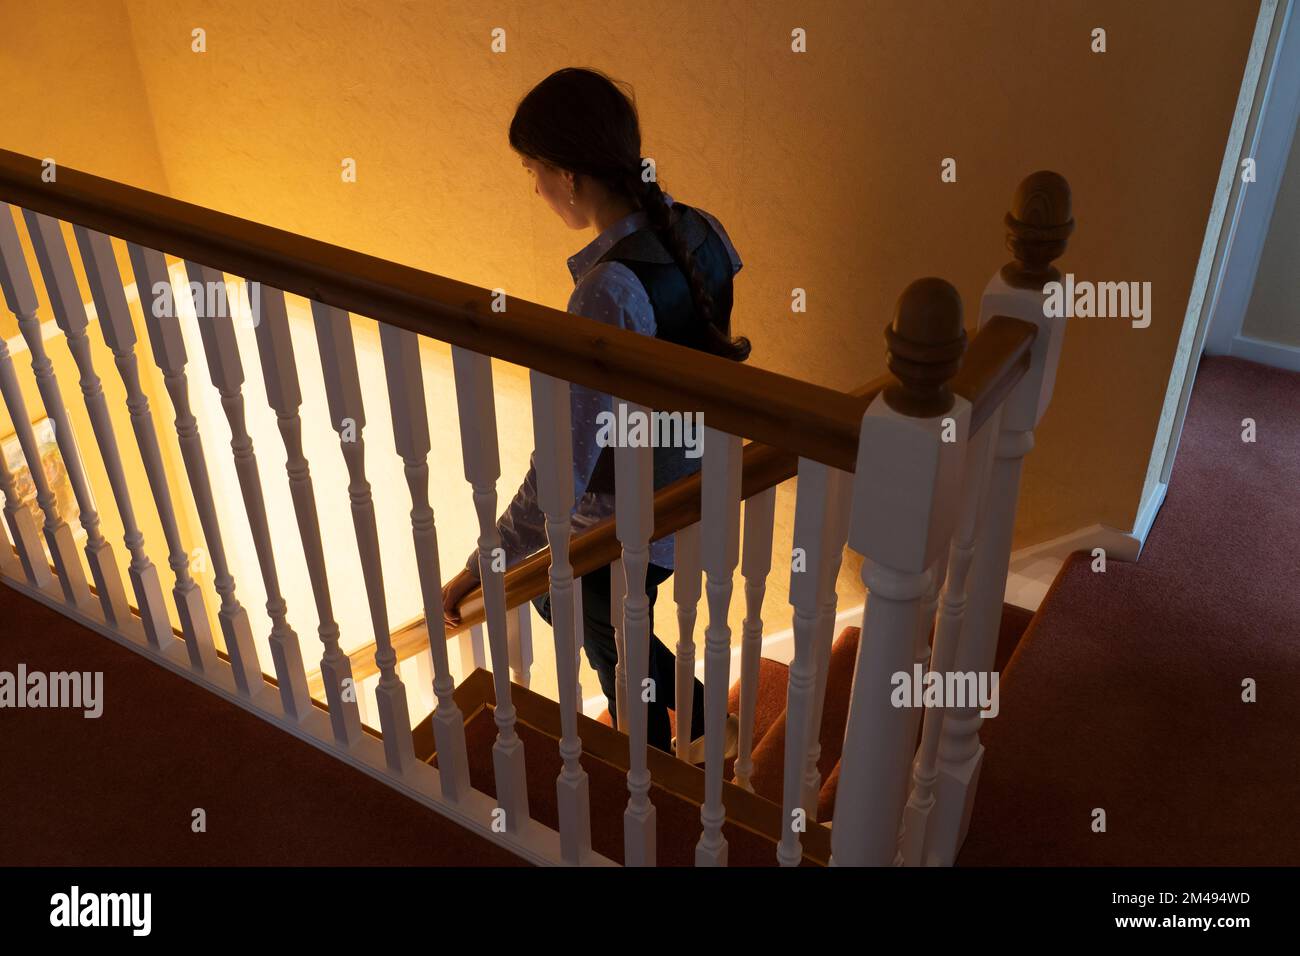 A young woman walking downstairs in a UK house. Concept: feeling alone, feeling fearful, feeling trepidation, feeling alone, walking into the light Stock Photo